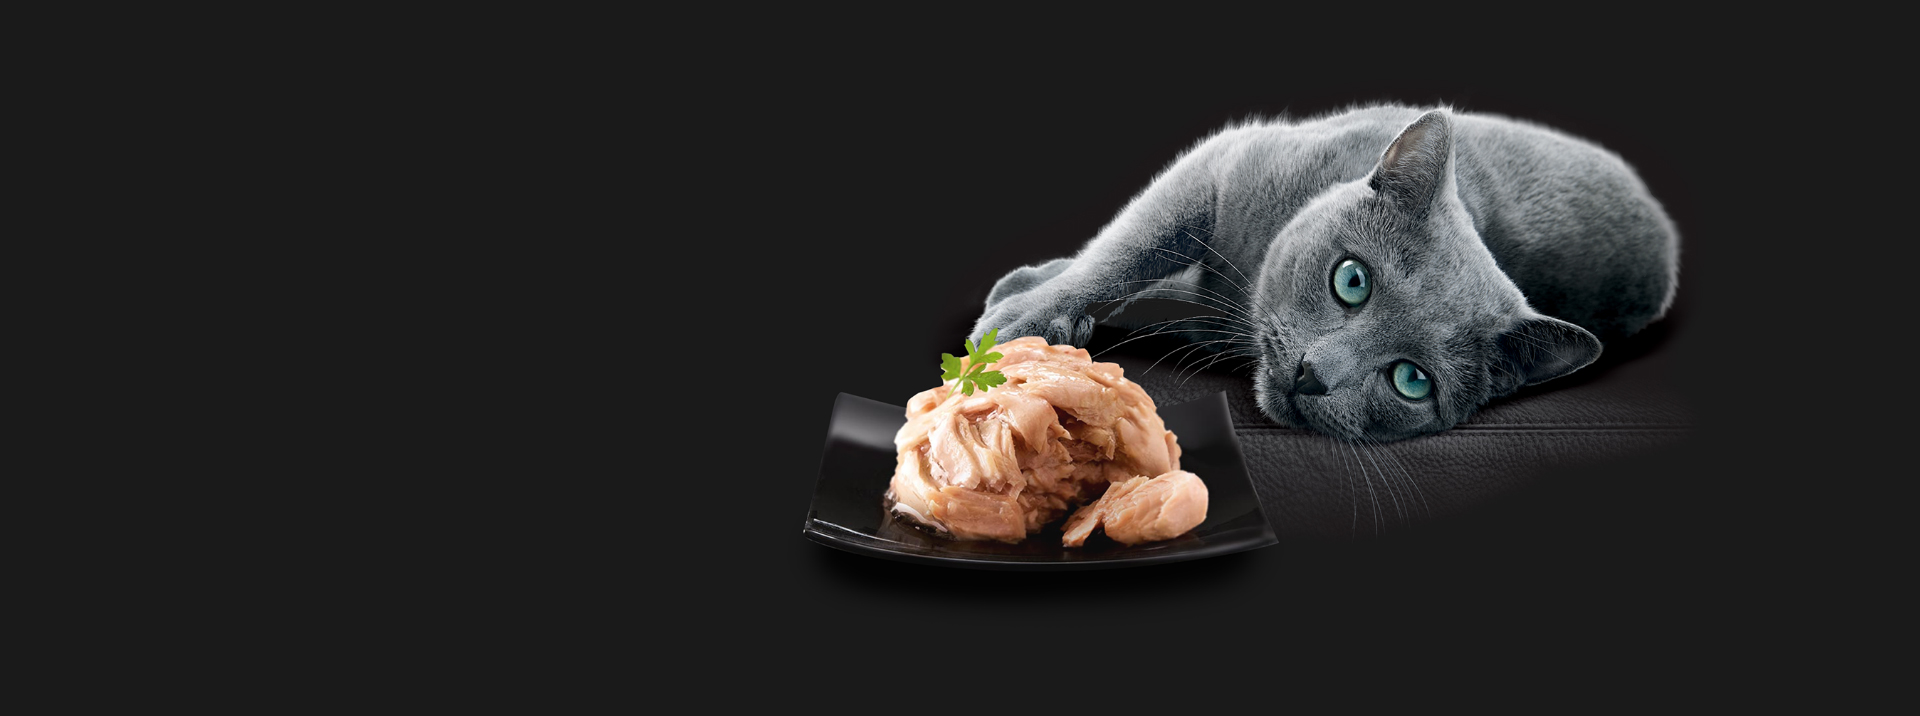 Grey cat lying on a black surface next a bowl of SHEBA cat food on a plate